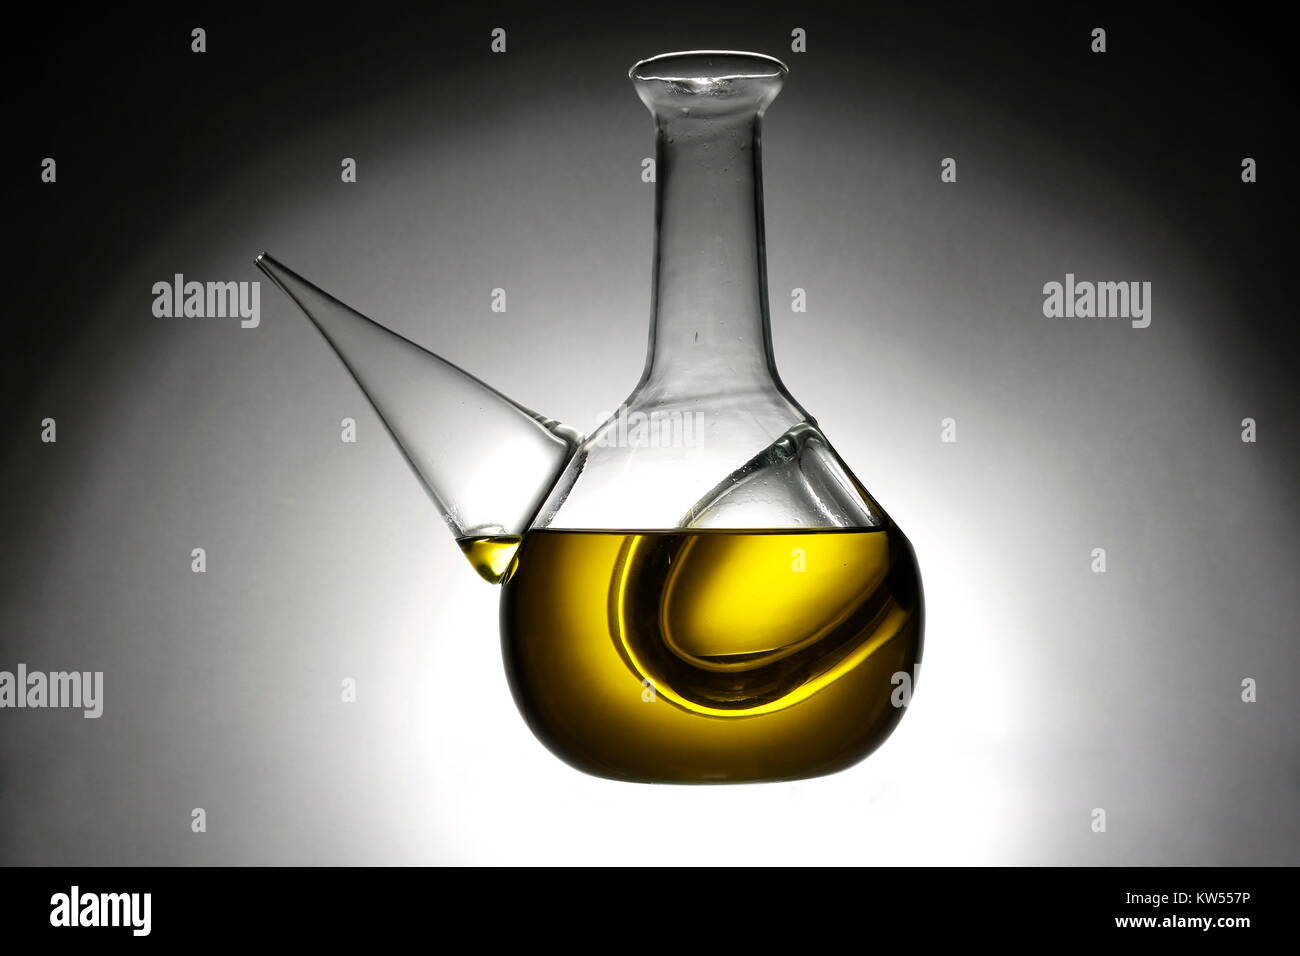 Olive oil in a carafe, Stock Photo